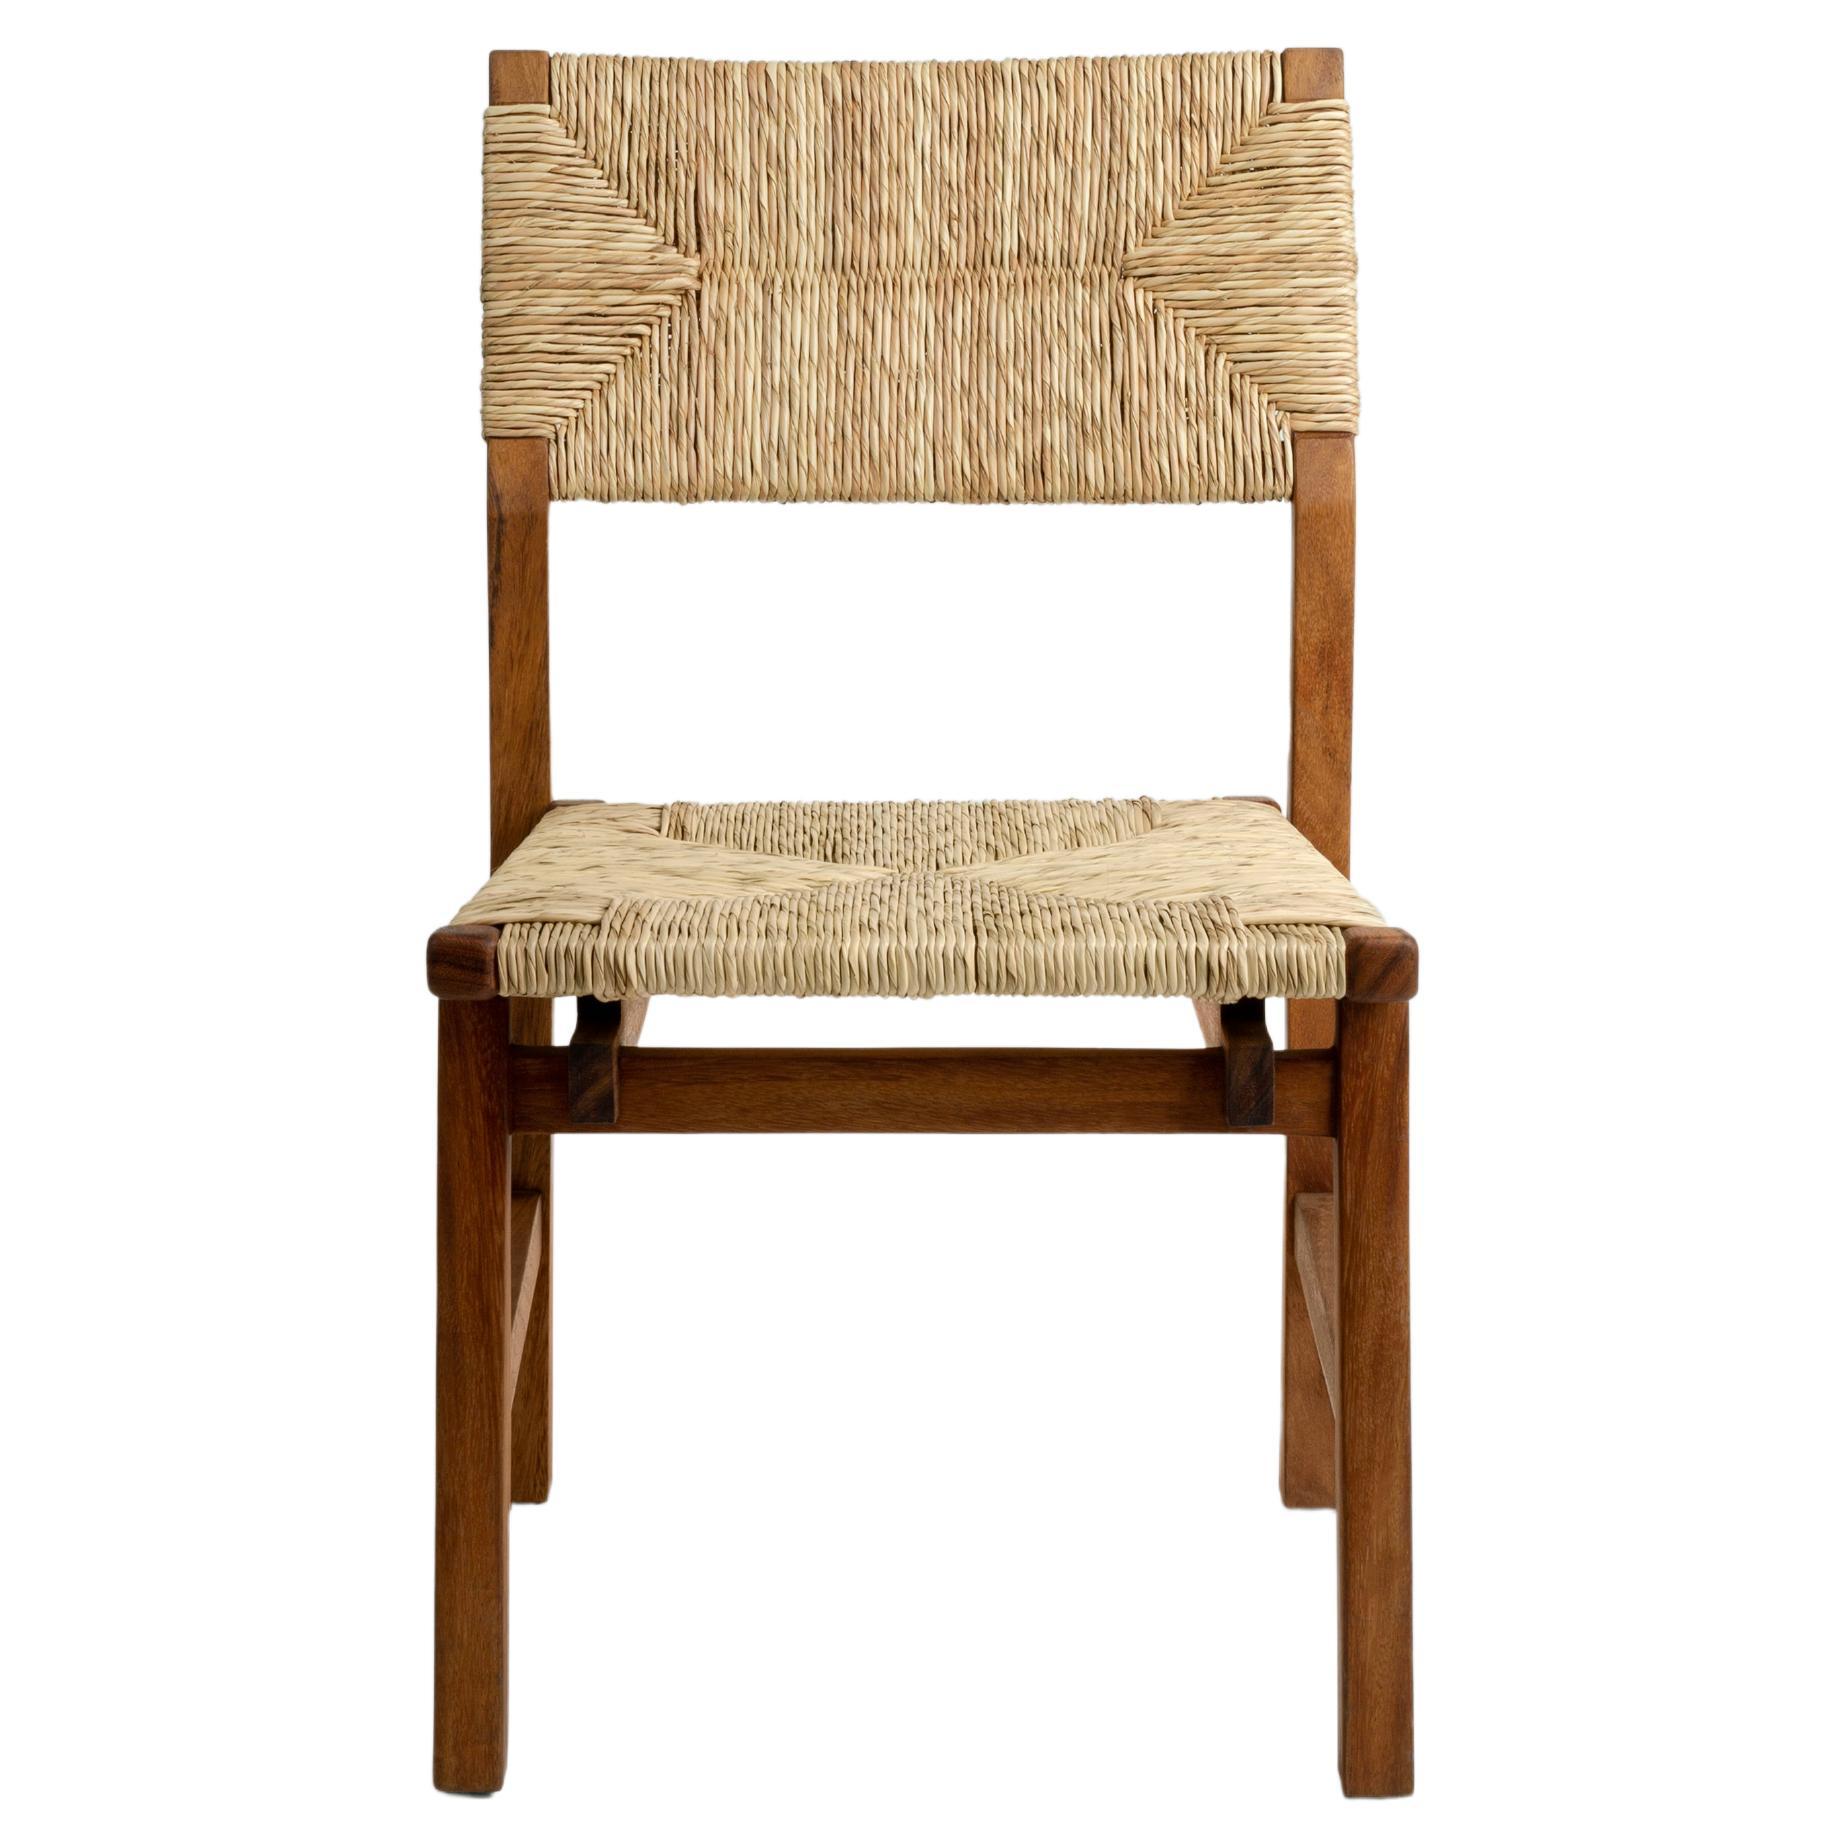 Customizable Modern Dining chair Lago, Solid wood, handcrafted natural fiber.